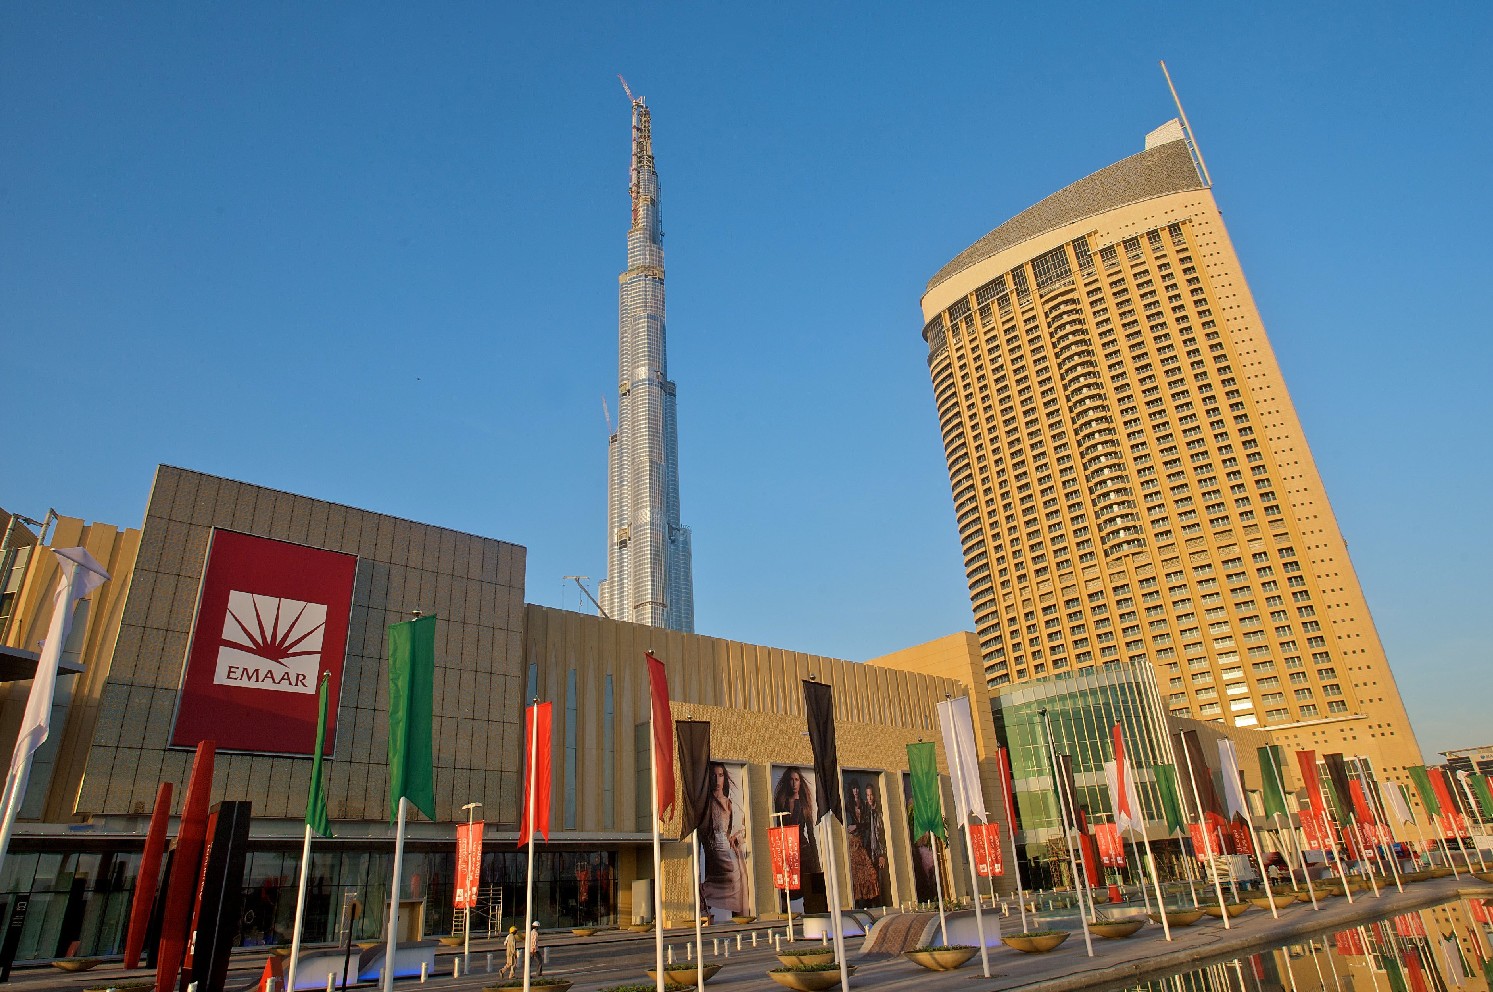 The Dubai Mall is a shopping mall in Dubai and largest in the world.